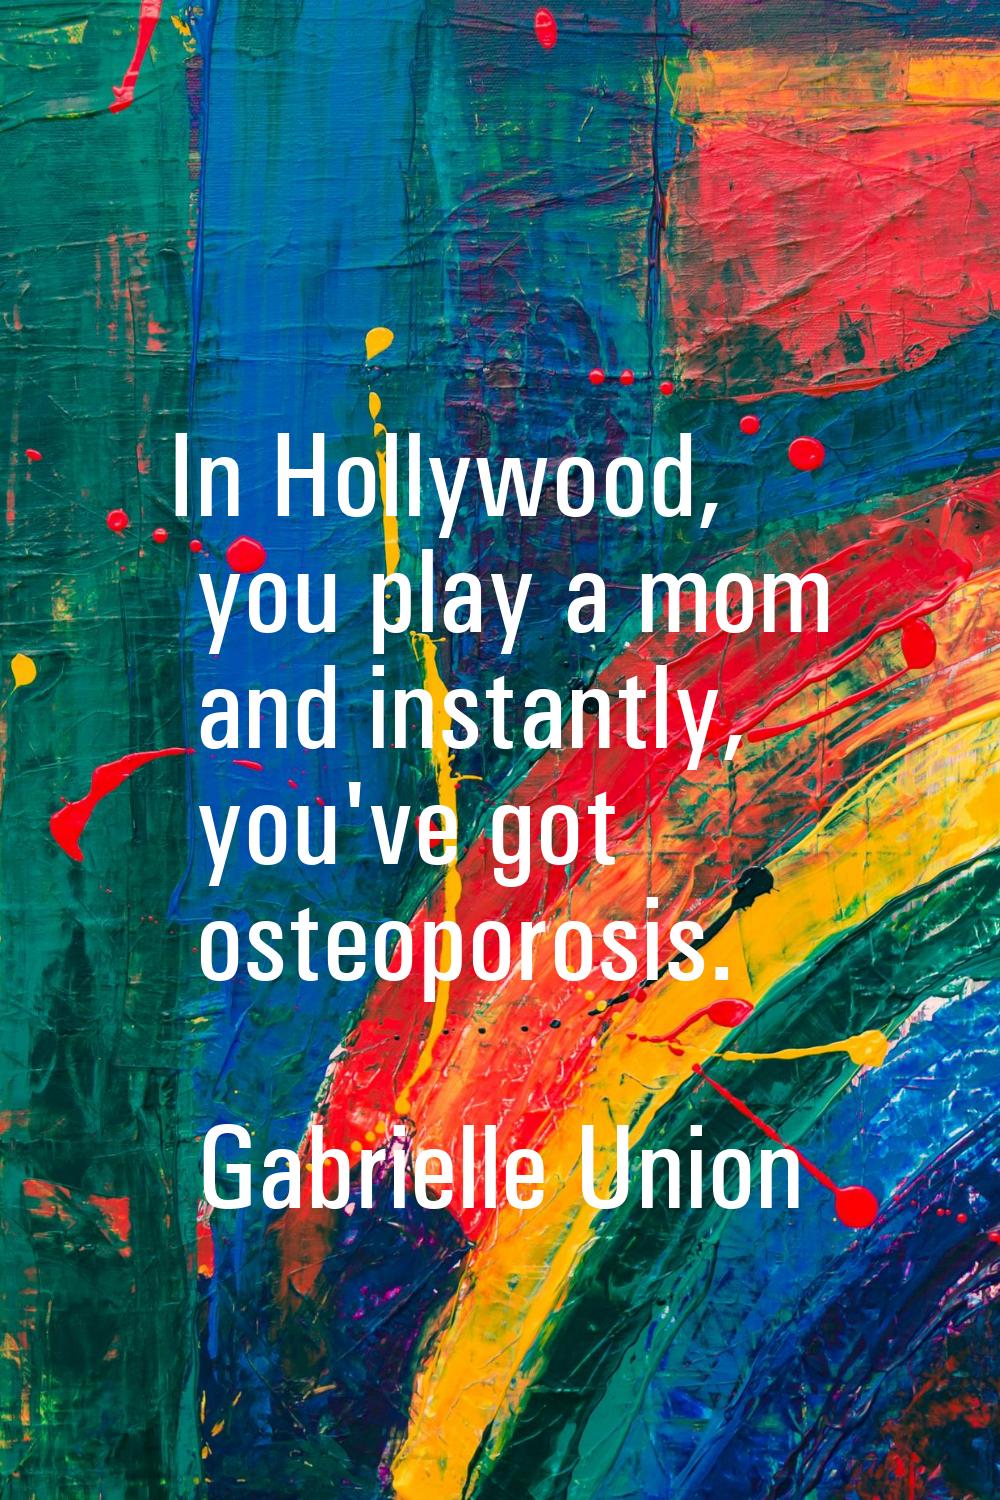 In Hollywood, you play a mom and instantly, you've got osteoporosis.